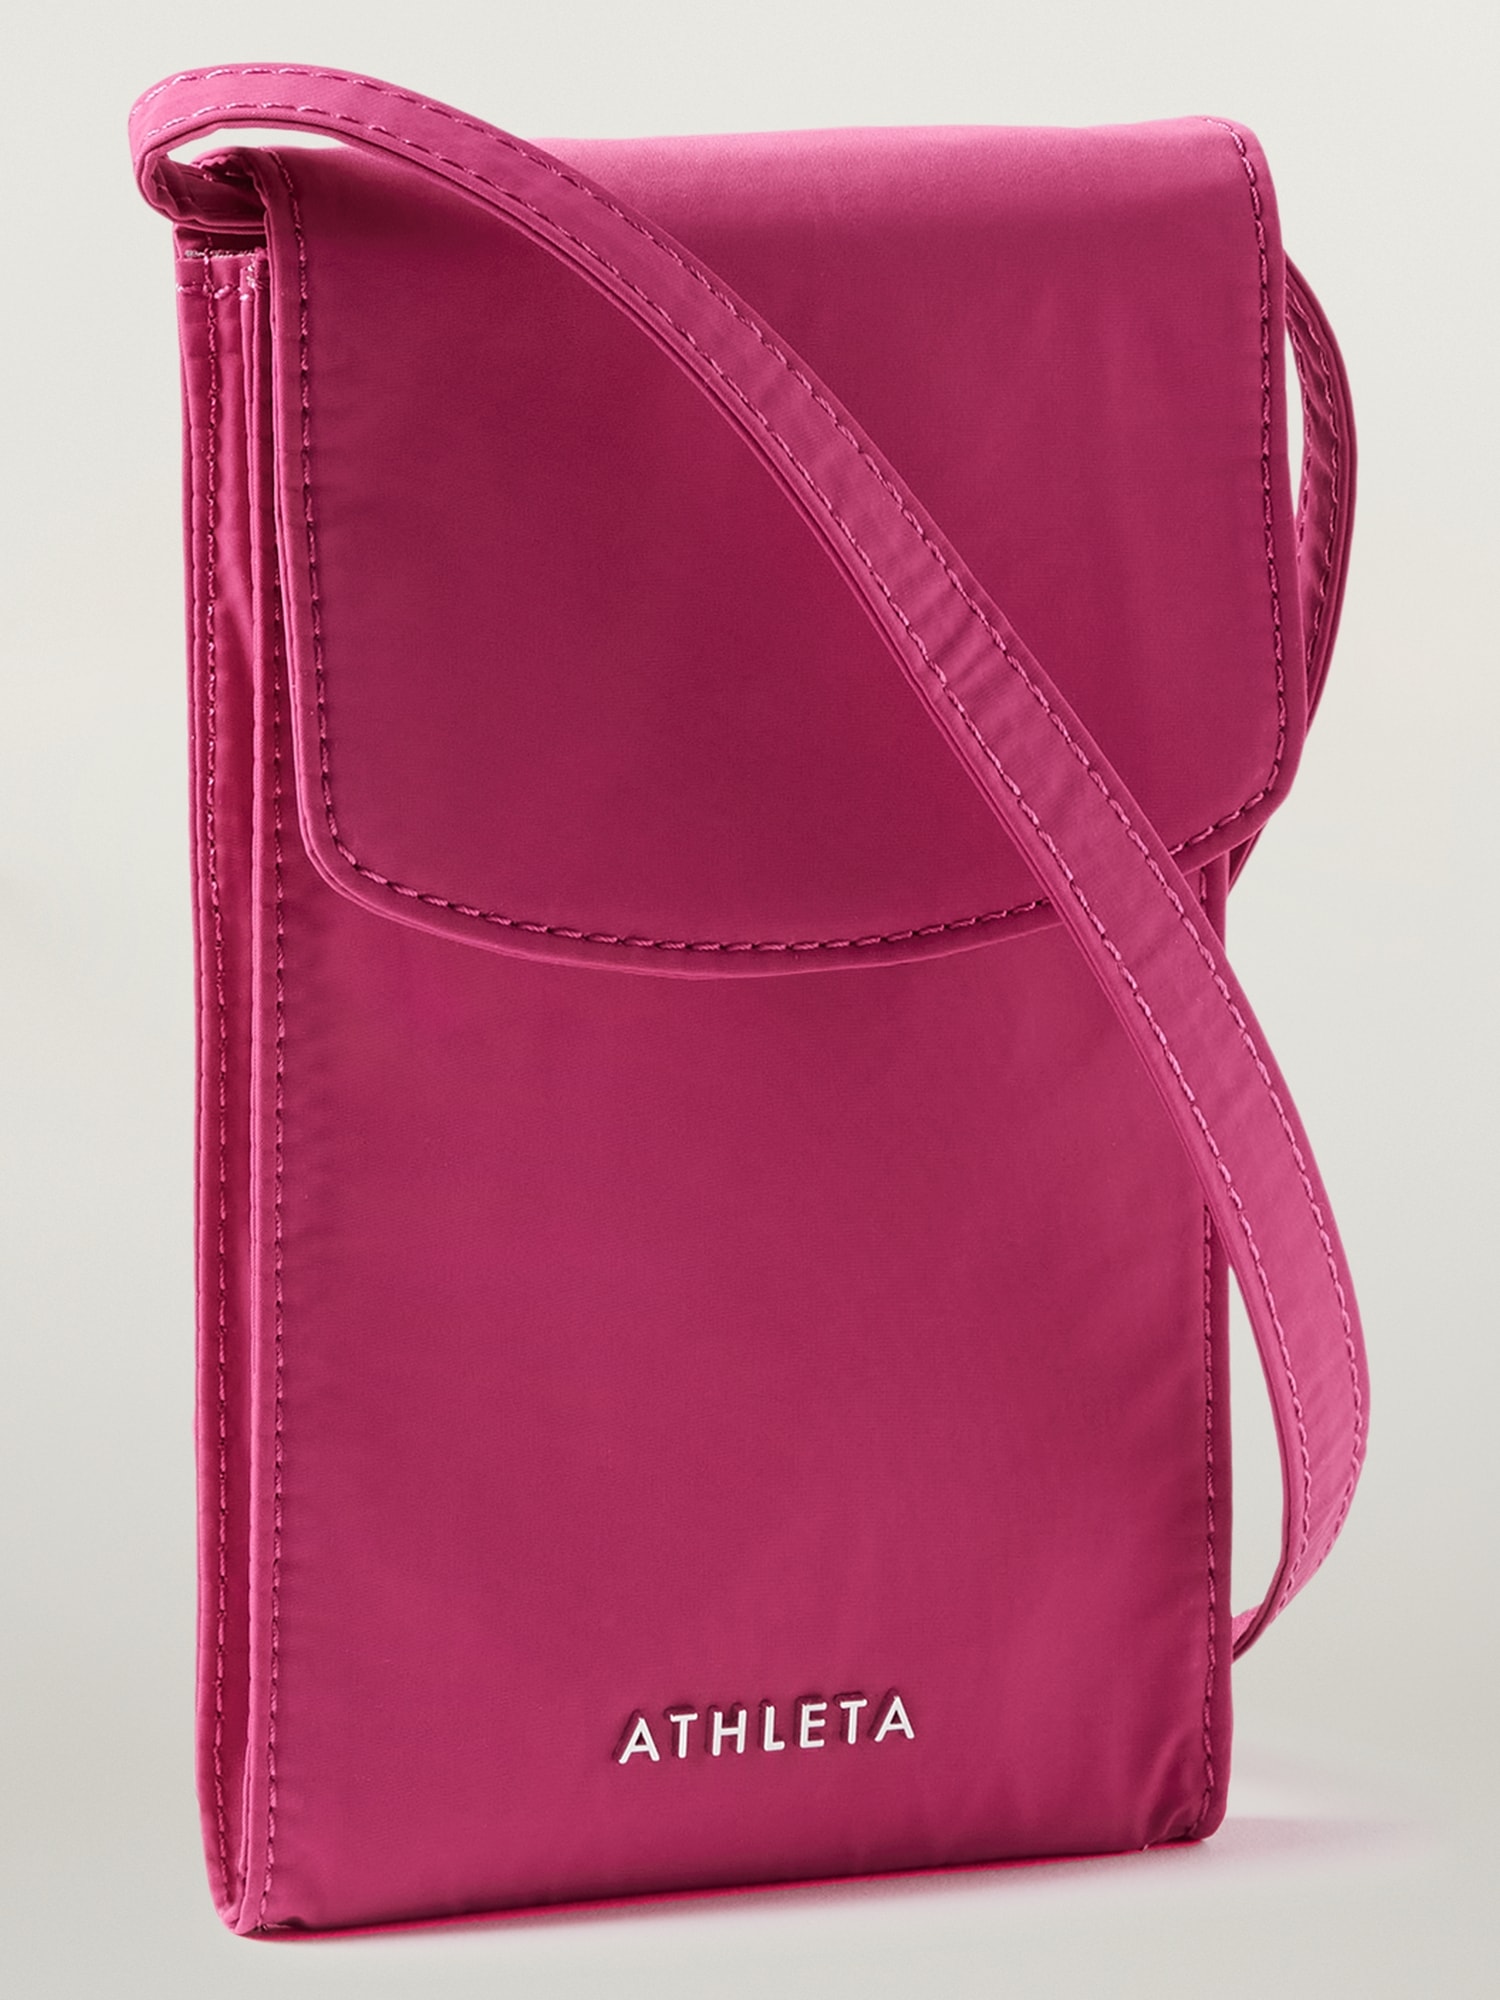 Athleta All About Phone Crossbody Bag In Pink